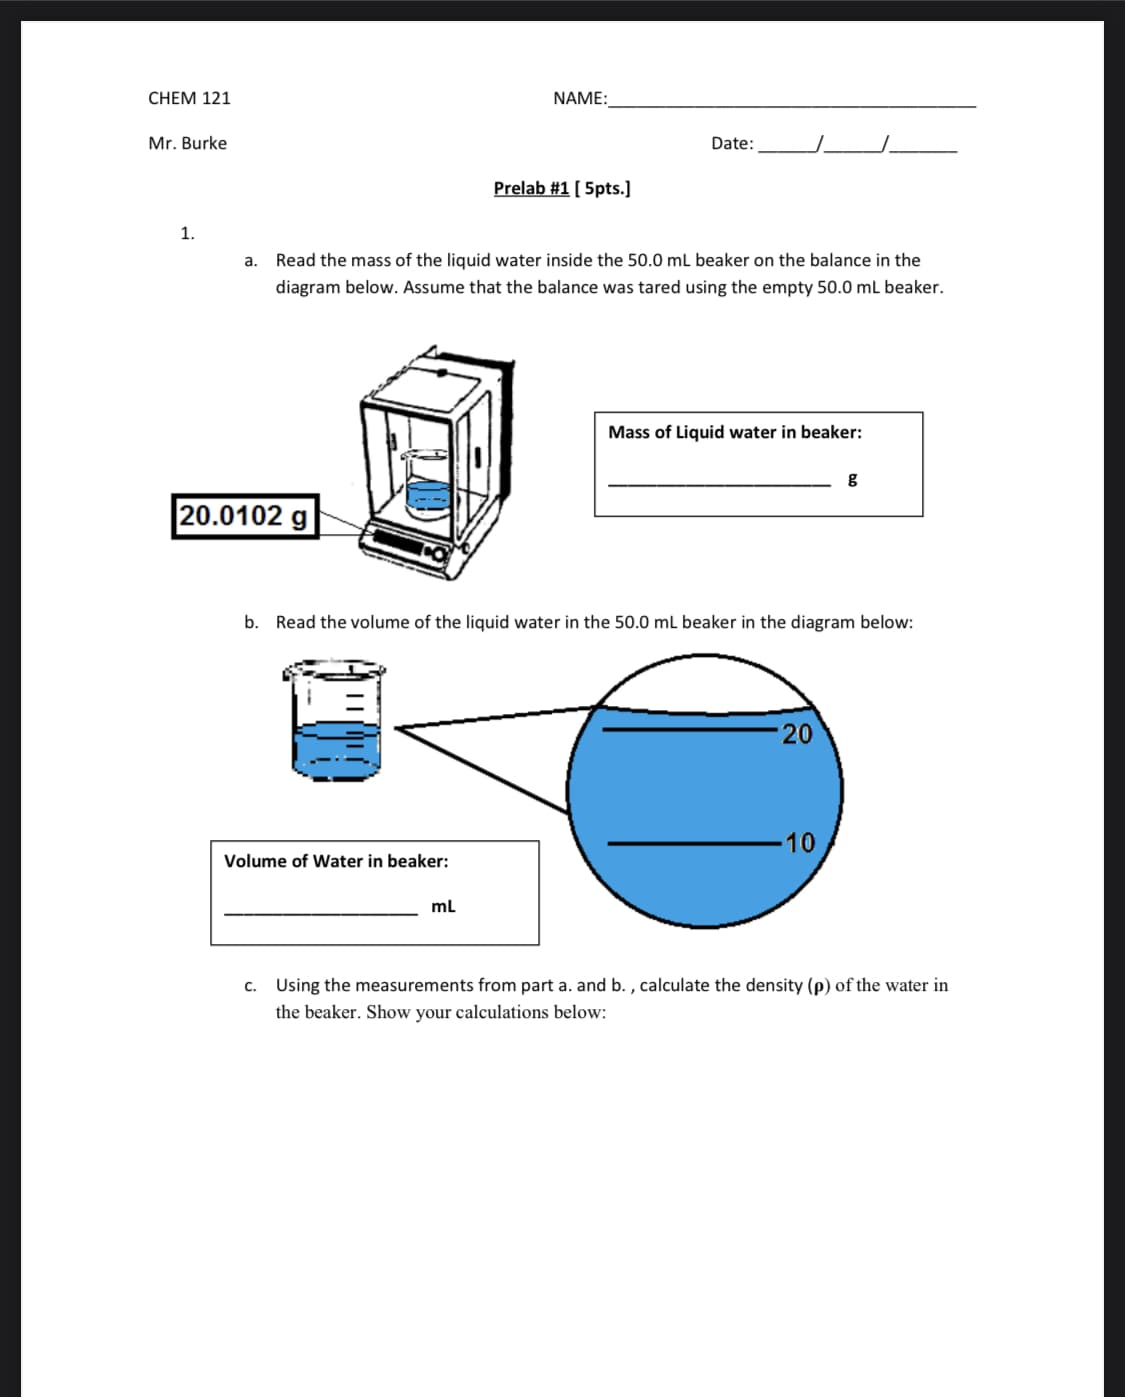 CHEM 121
NAME:
Mr. Burke
Date:
Prelab #1 [ 5pts.]
1.
a. Read the mass of the liquid water inside the 50.0 mL beaker on the balance in the
diagram below. Assume that the balance was tared using the empty 50.0 mL beaker.
Mass of Liquid water in beaker:
g
20.0102 g
b. Read the volume of the liquid water in the 50.0 mL beaker in the diagram below:
20
10
Volume of Water in beaker:
ml
c. Using the measurements from part a. and b. , calculate the density (p) of the water in
the beaker. Show your calculations below:
